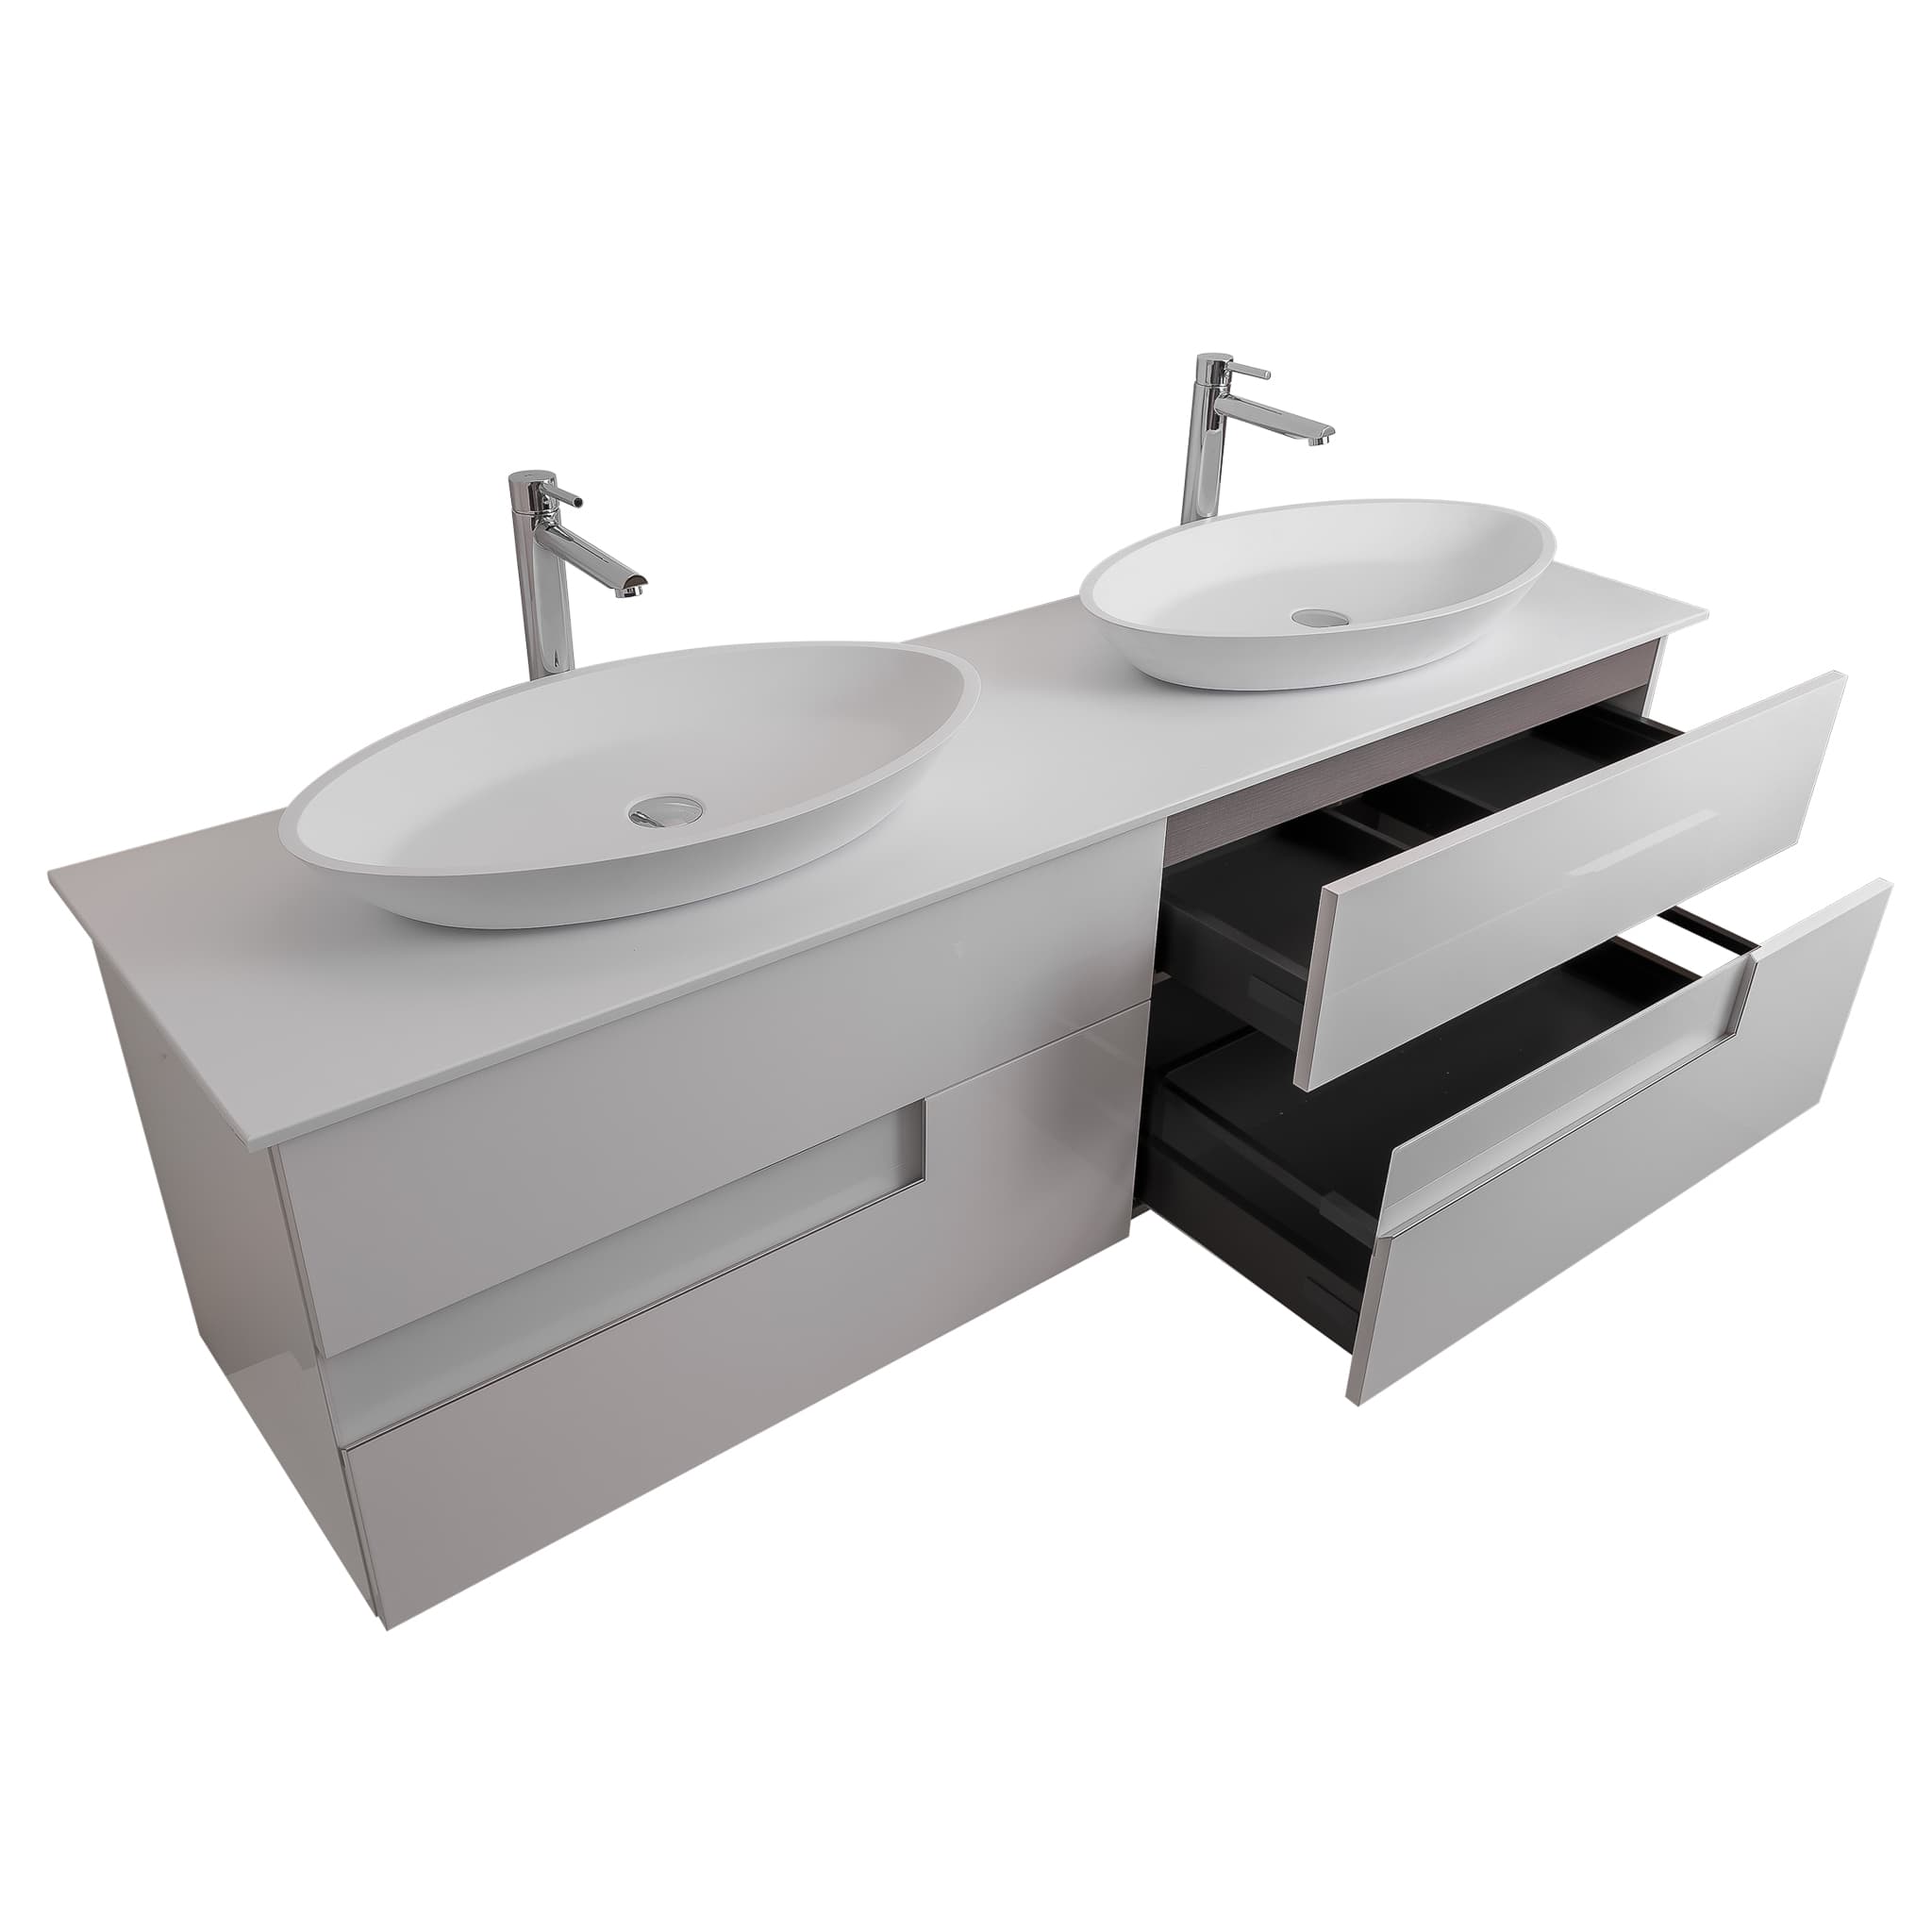 Vision 63 White High Gloss Cabinet, Solid Surface Flat White Counter And Two Oval Solid Surface White Basin 1305, Wall Mounted Modern Vanity Set